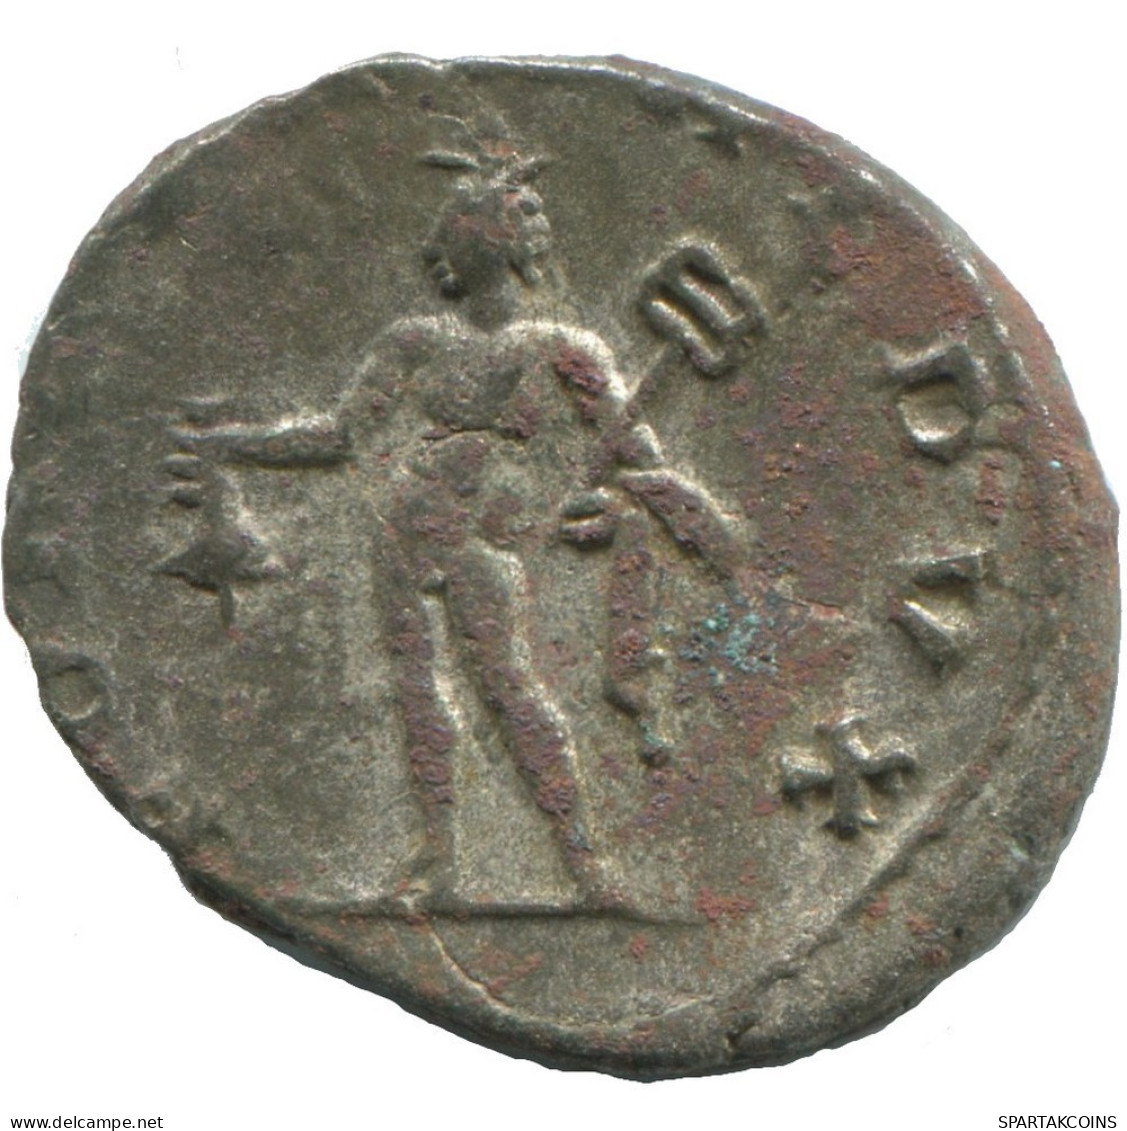 VALERIAN I ANTIOCH AD254-255 SILVERED ROMAN Moneda 3.2g/20mm #ANT2736.41.E.A - The Military Crisis (235 AD To 284 AD)